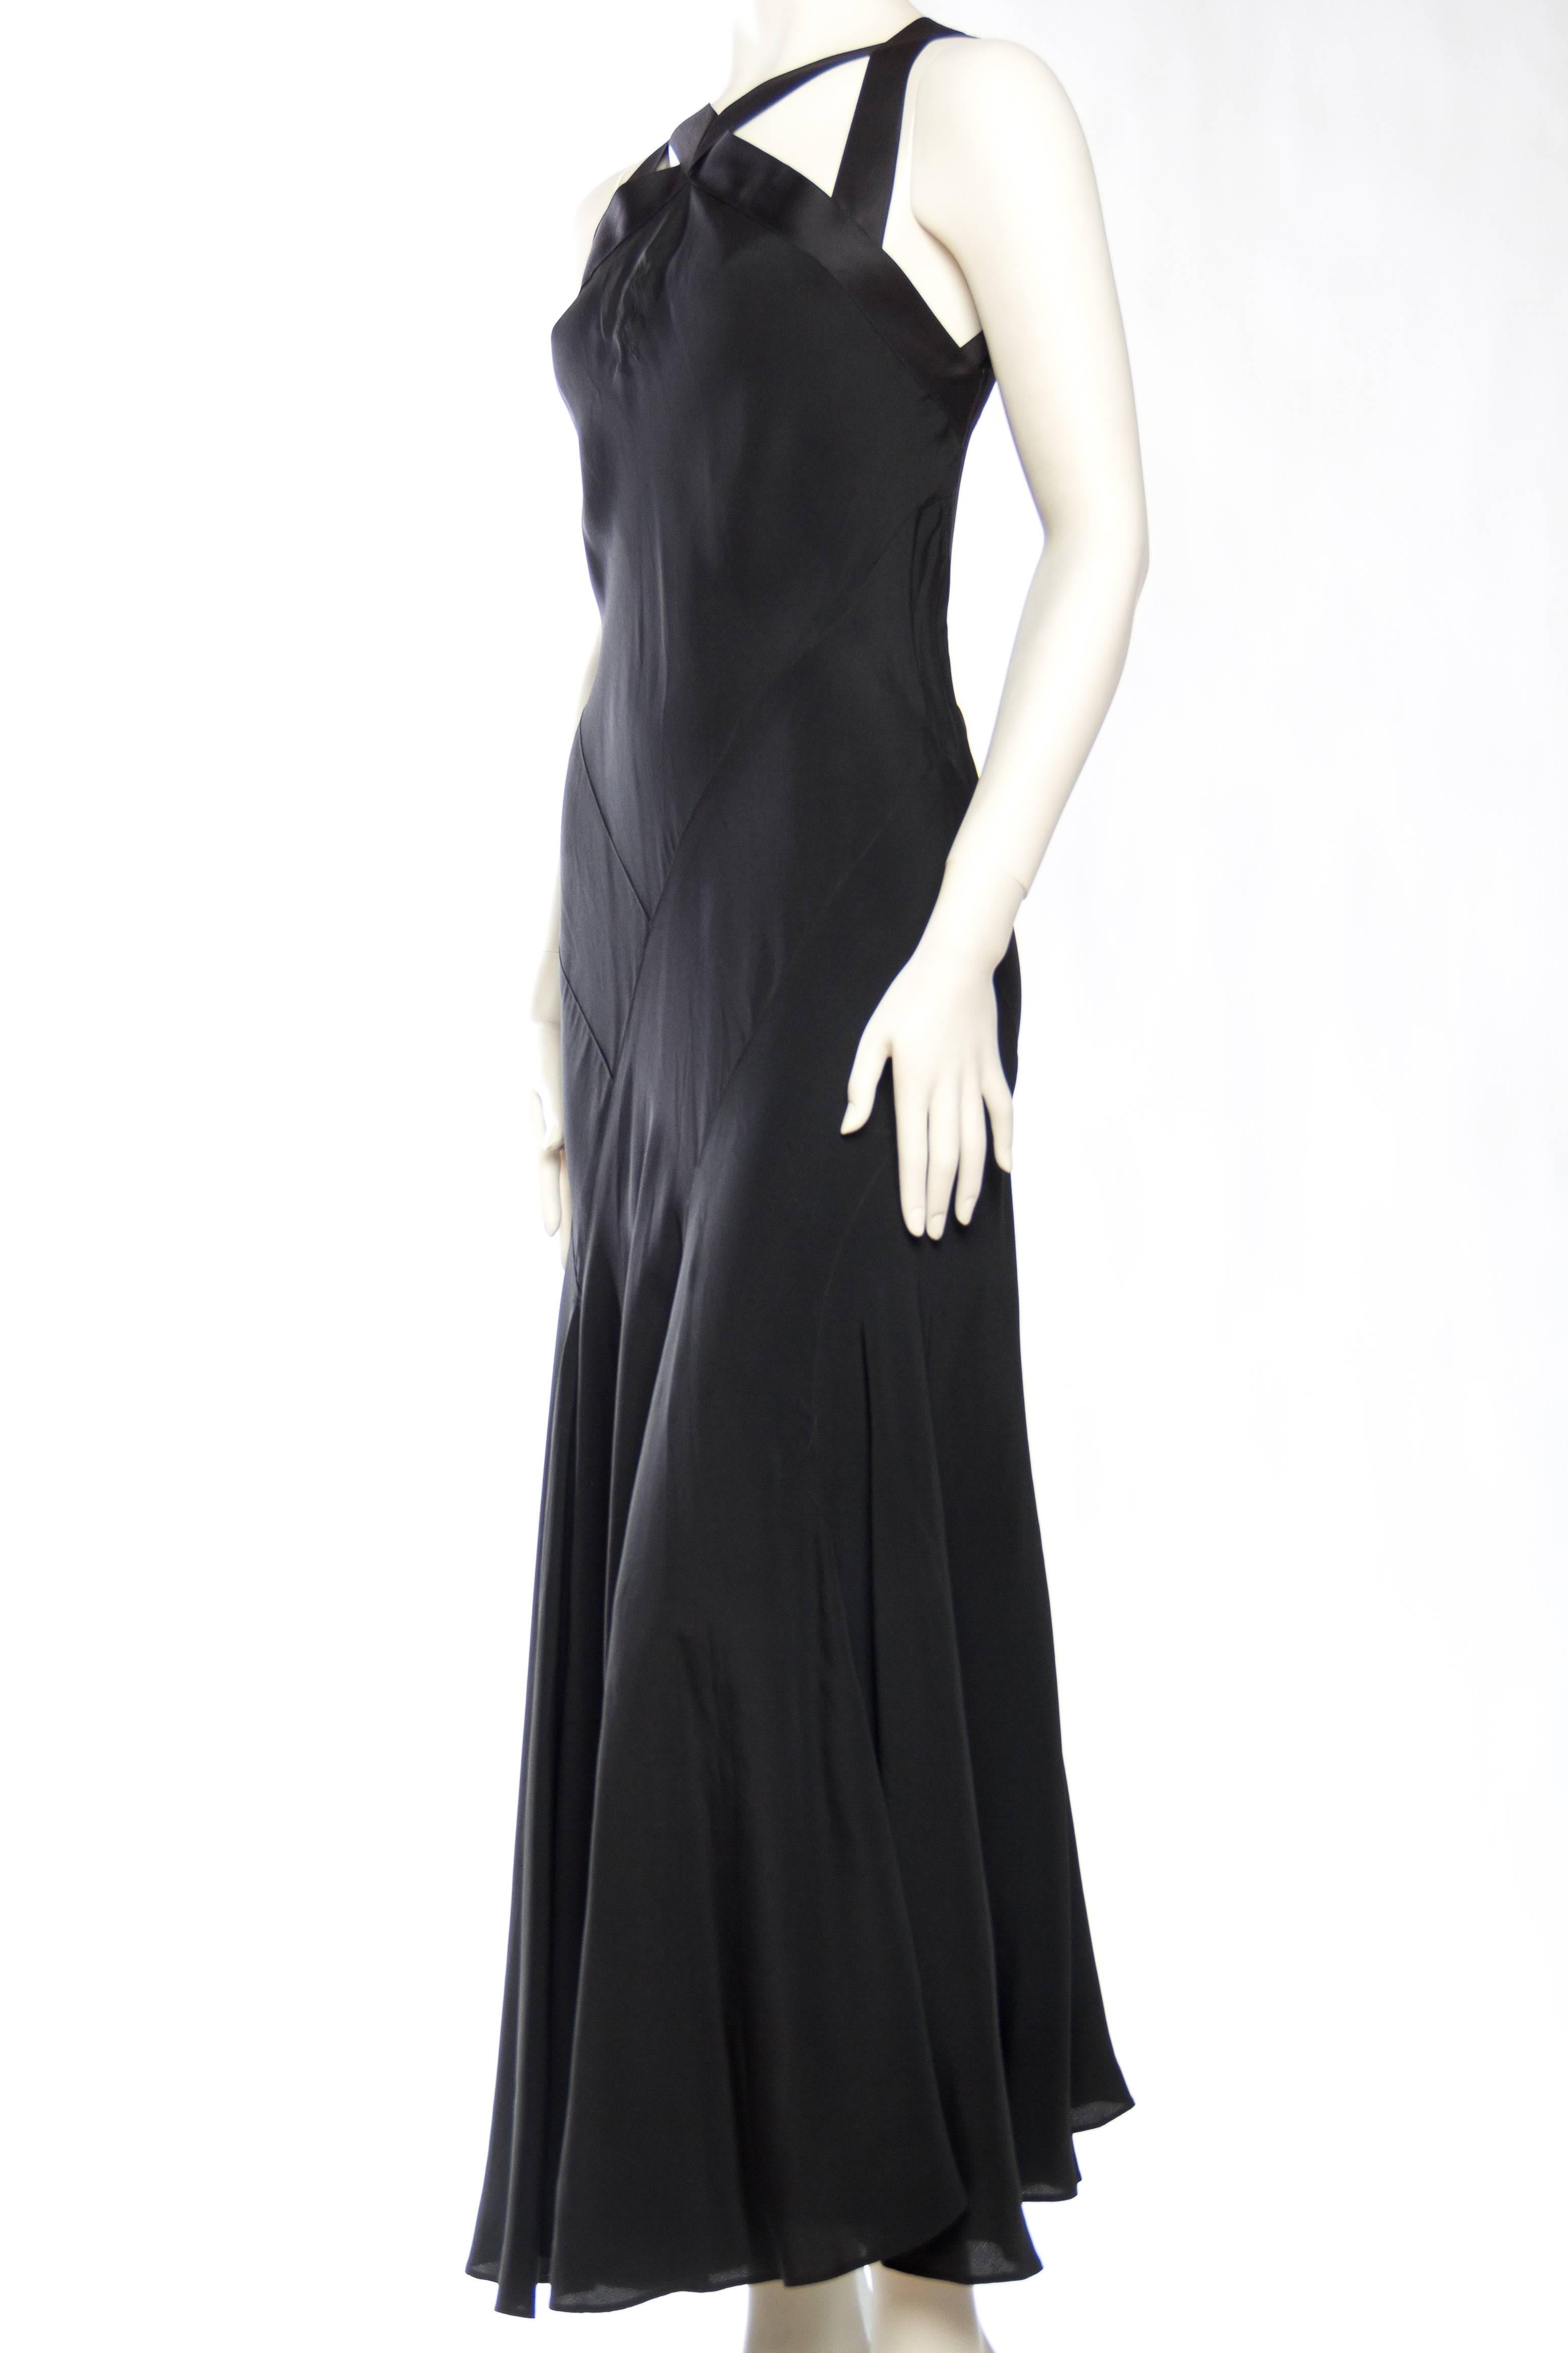 This high fashion gown from the 1930s silver screen era is a knockout. The silk has been draped on the bias and seamed up the body with a quiet asymmetry. The top of the dress has been re-built with vintage ribbon inspired off an original Lanvin